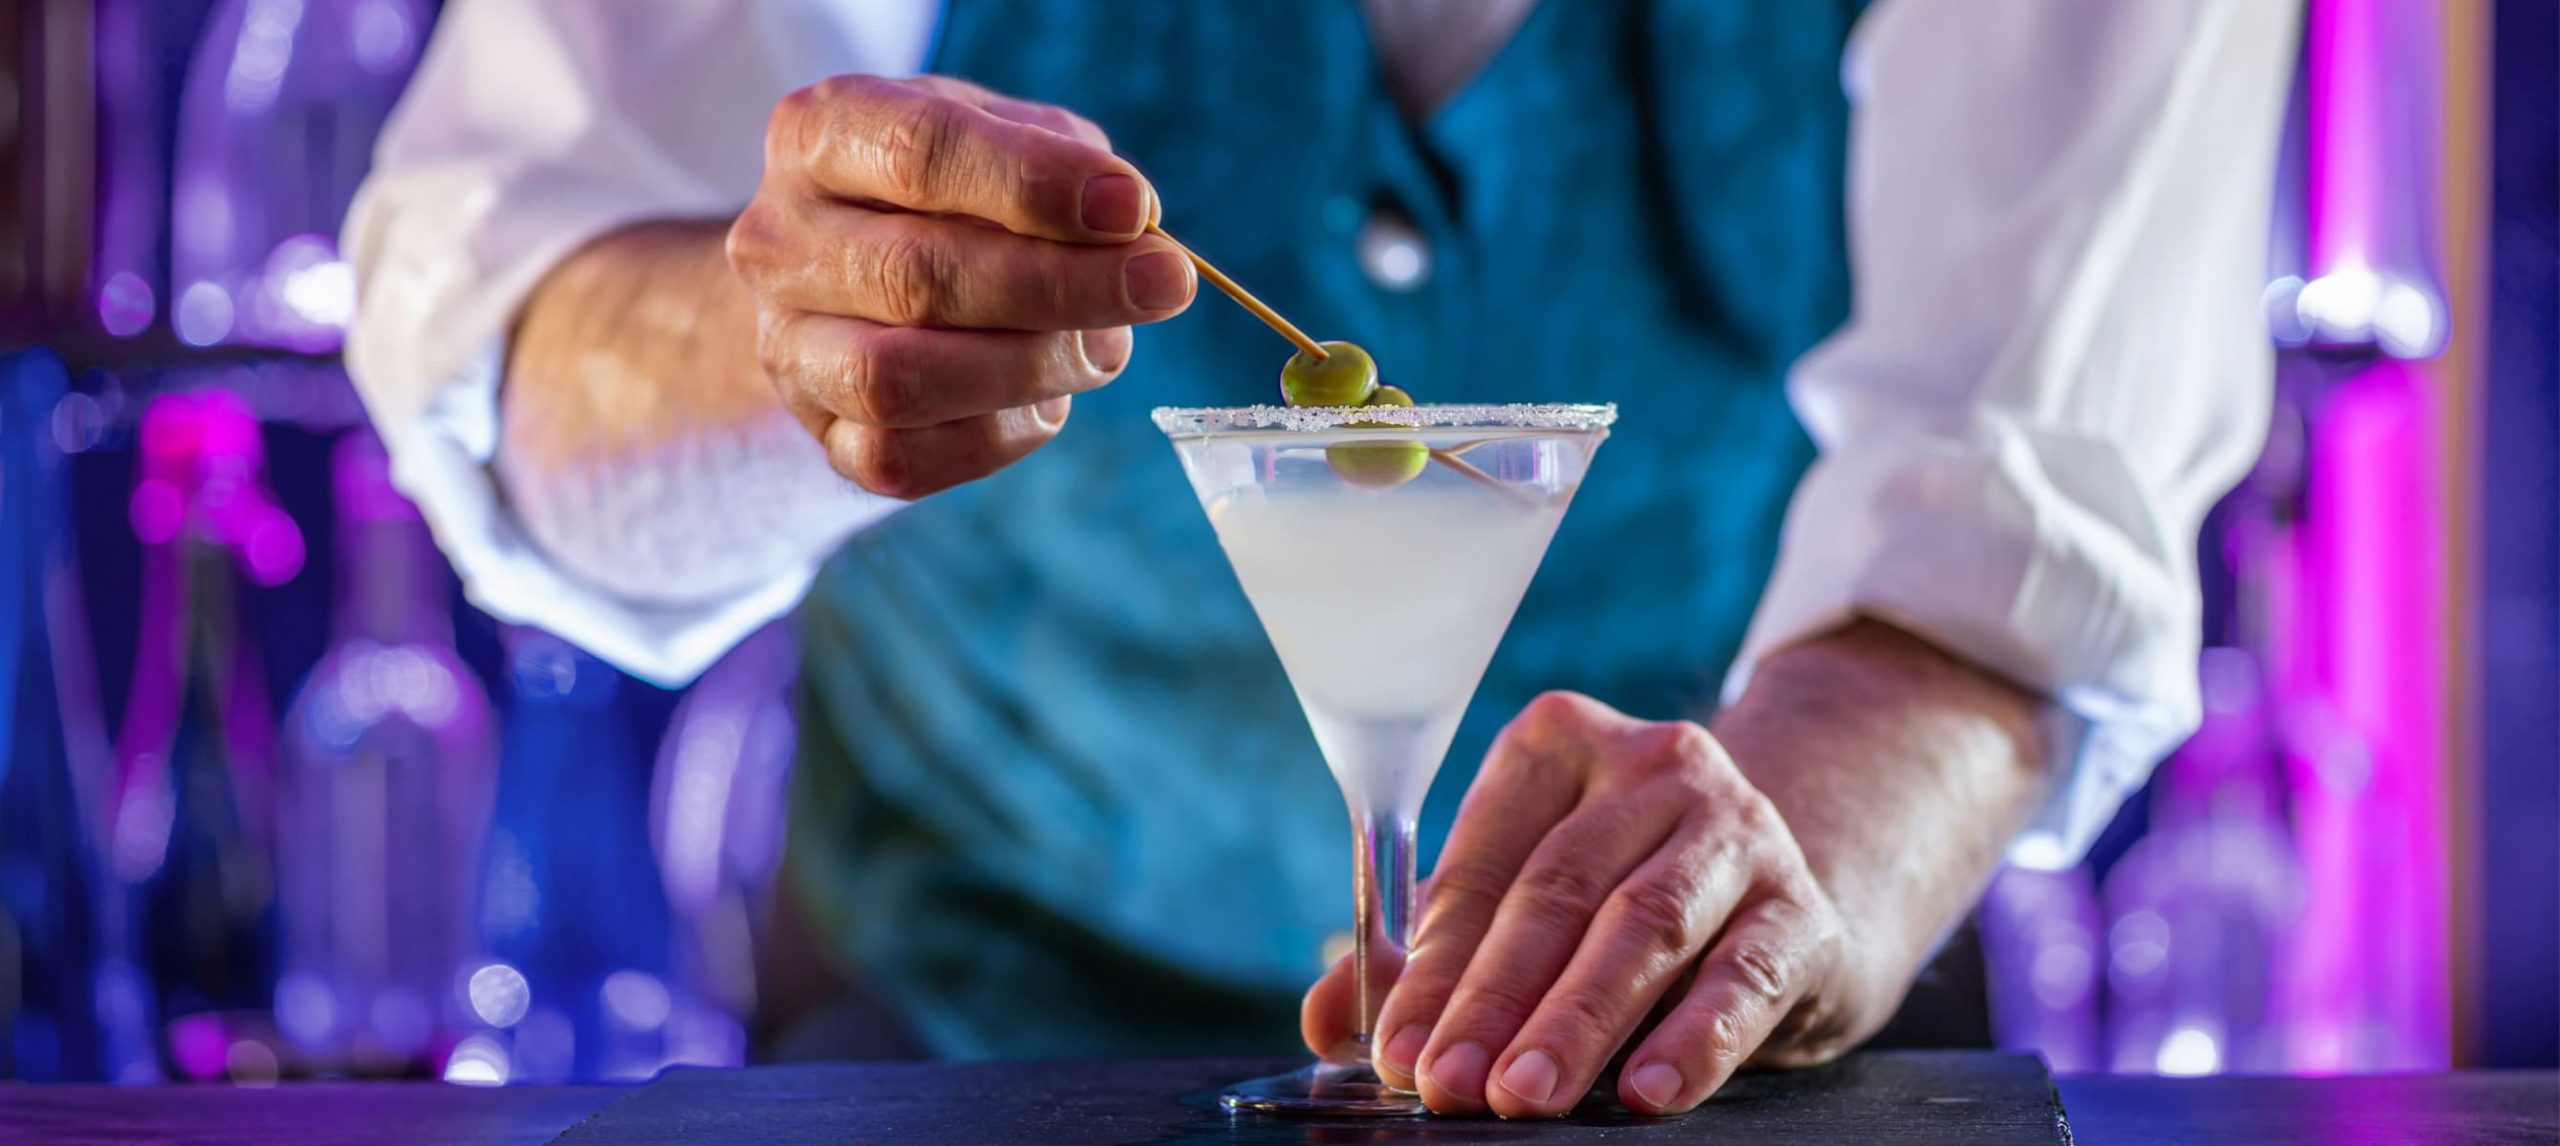 A mixologist putting an olive in a cocktail